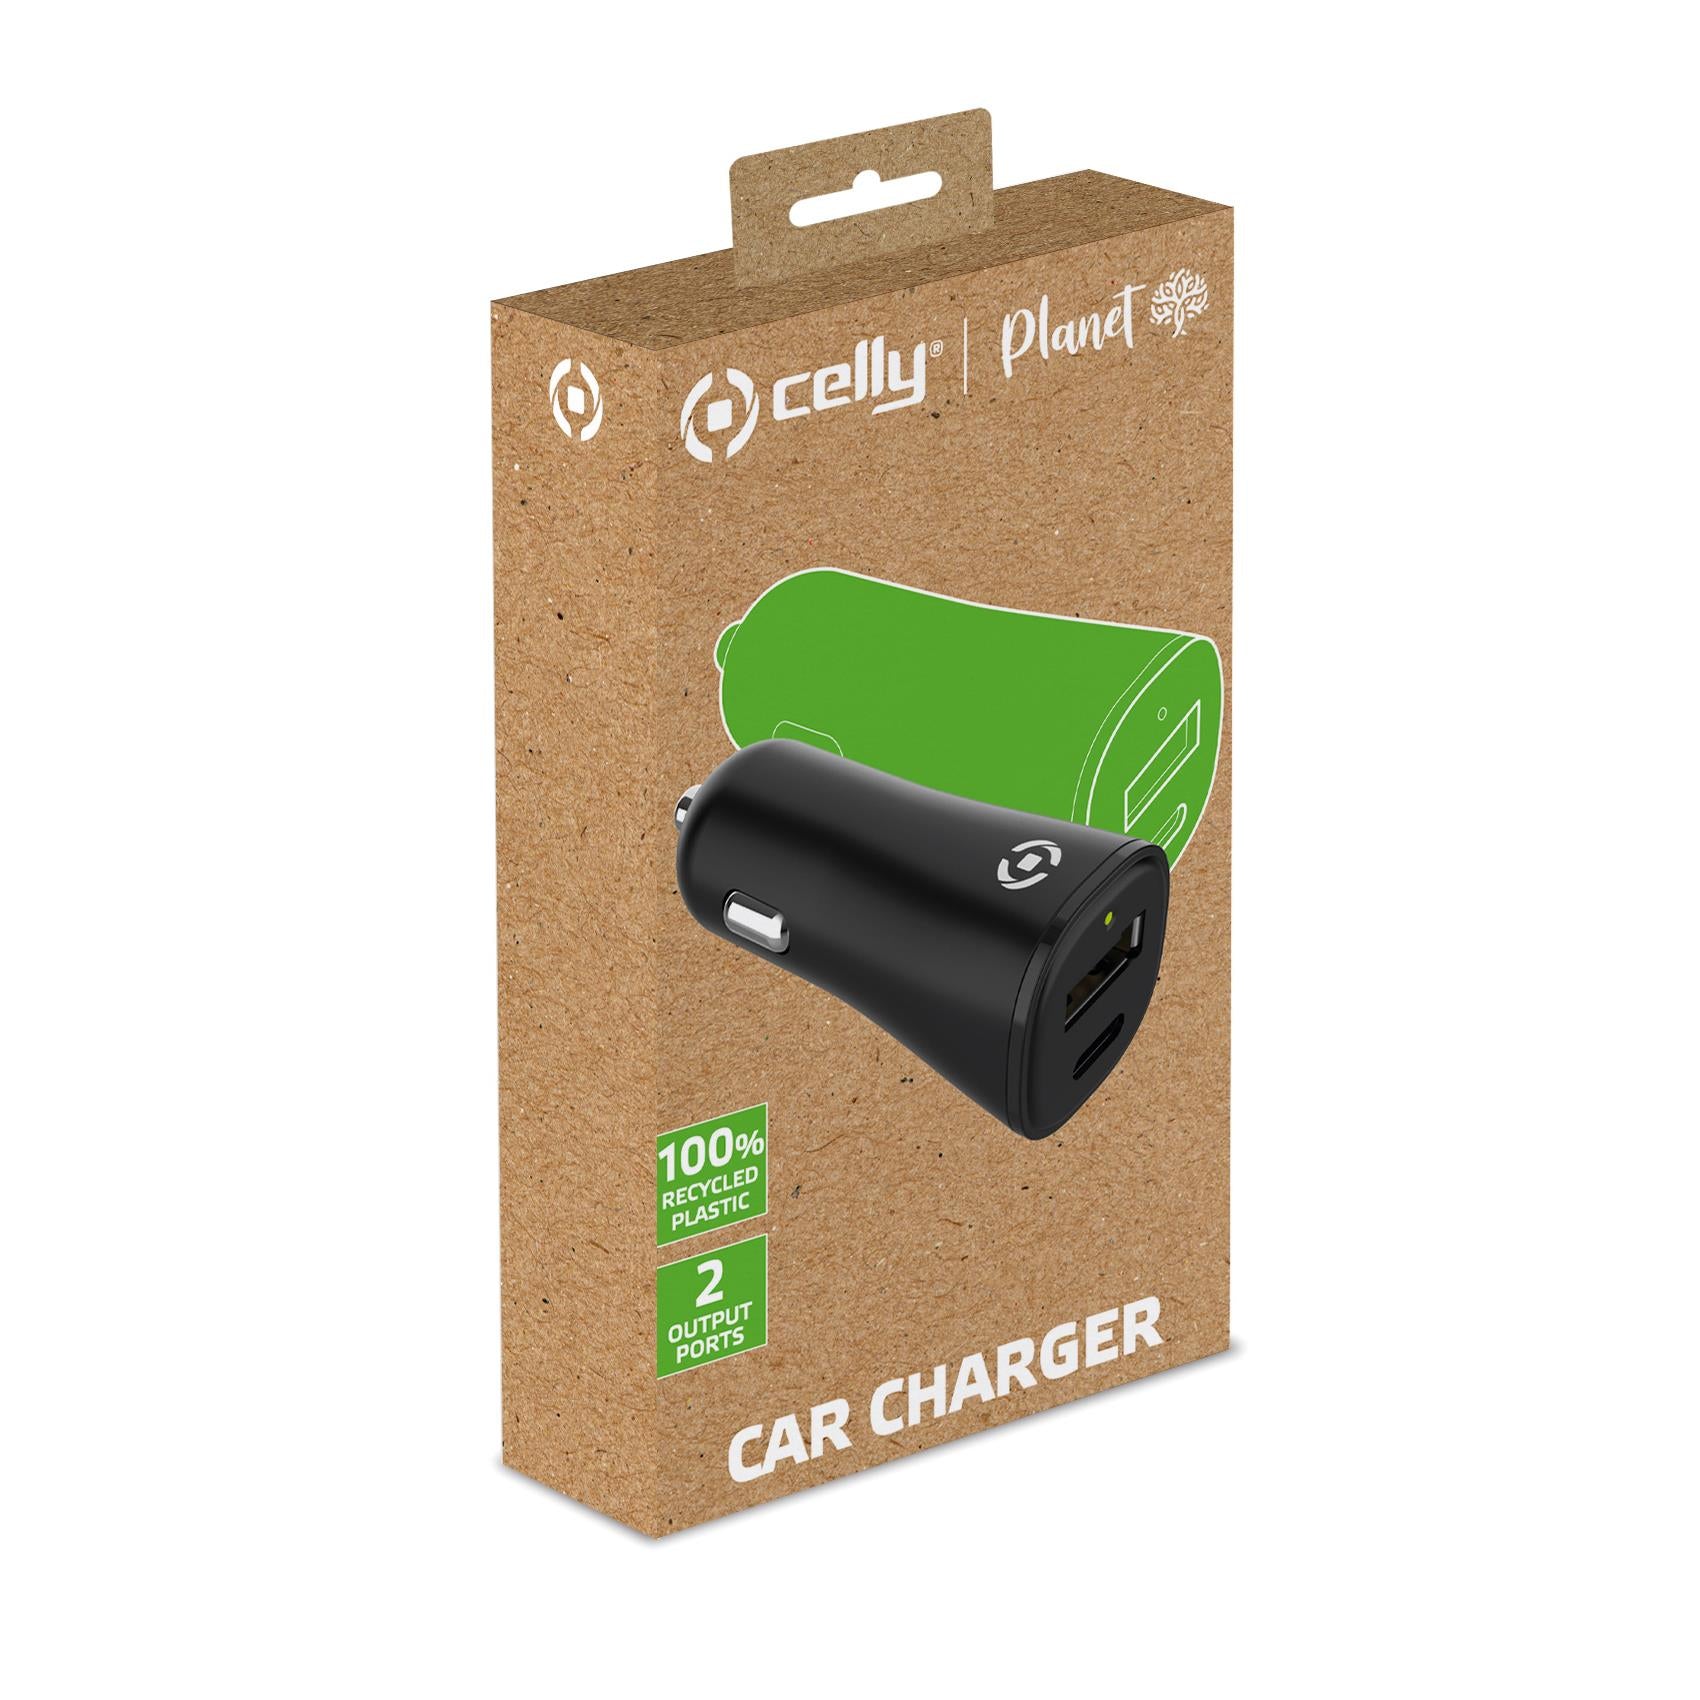 Celly GRSCCUSBUSBCBK - Car charger with 2 output ports made with 100% recycled plastic